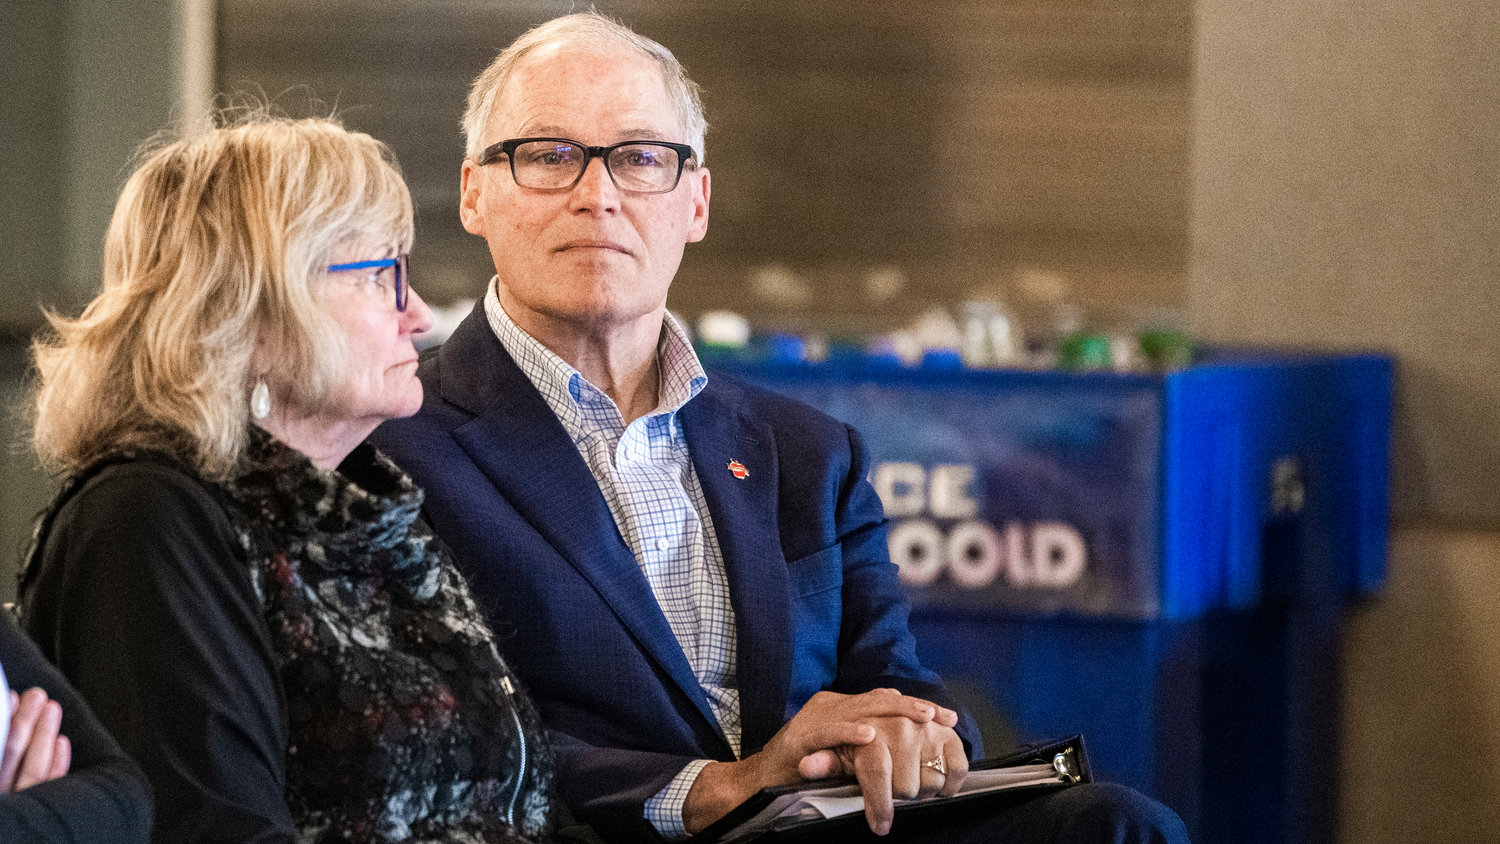 Trudi and Jay Inslee attend a meeting at the Chehalis Tribe Community Center Wednesday morning.